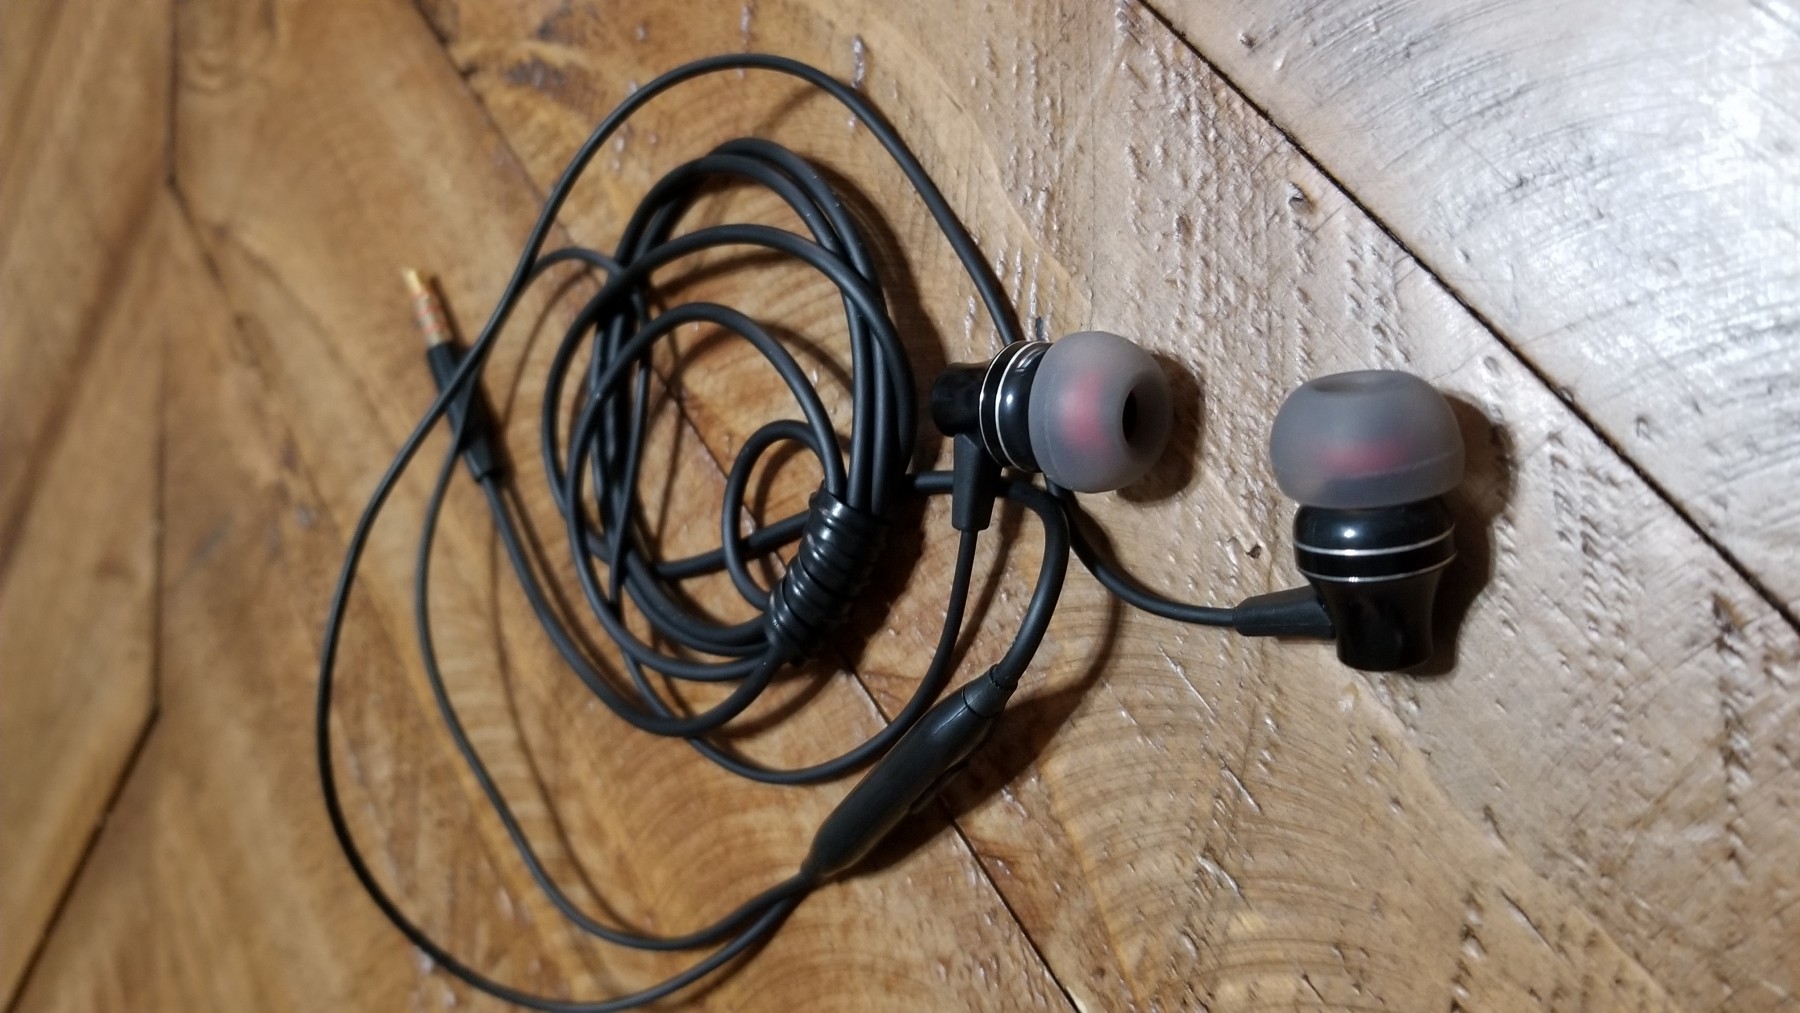 More great earbuds, but much pricier